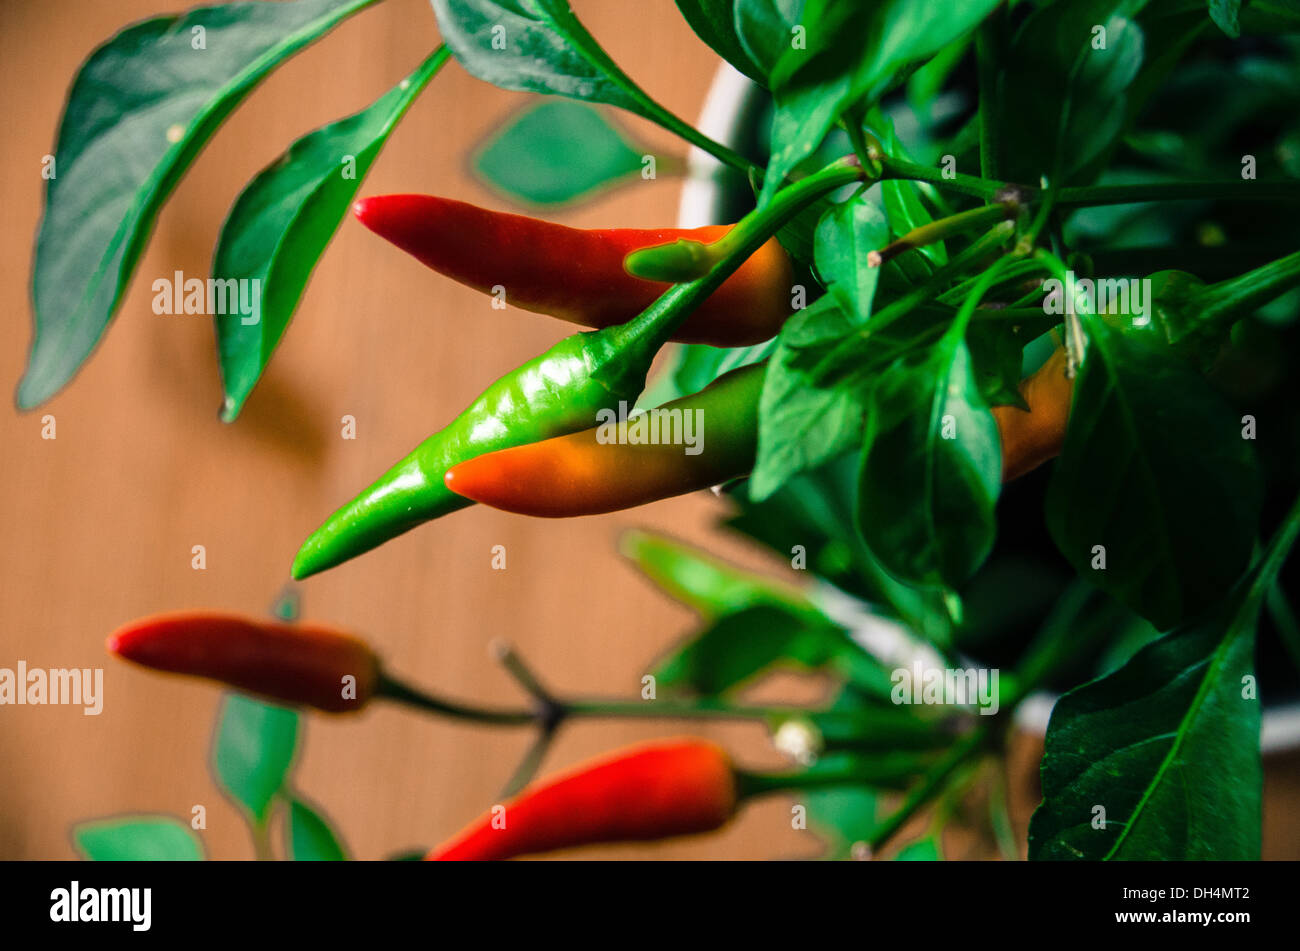 Chilli plant, with red and green chillis growing Stock Photo